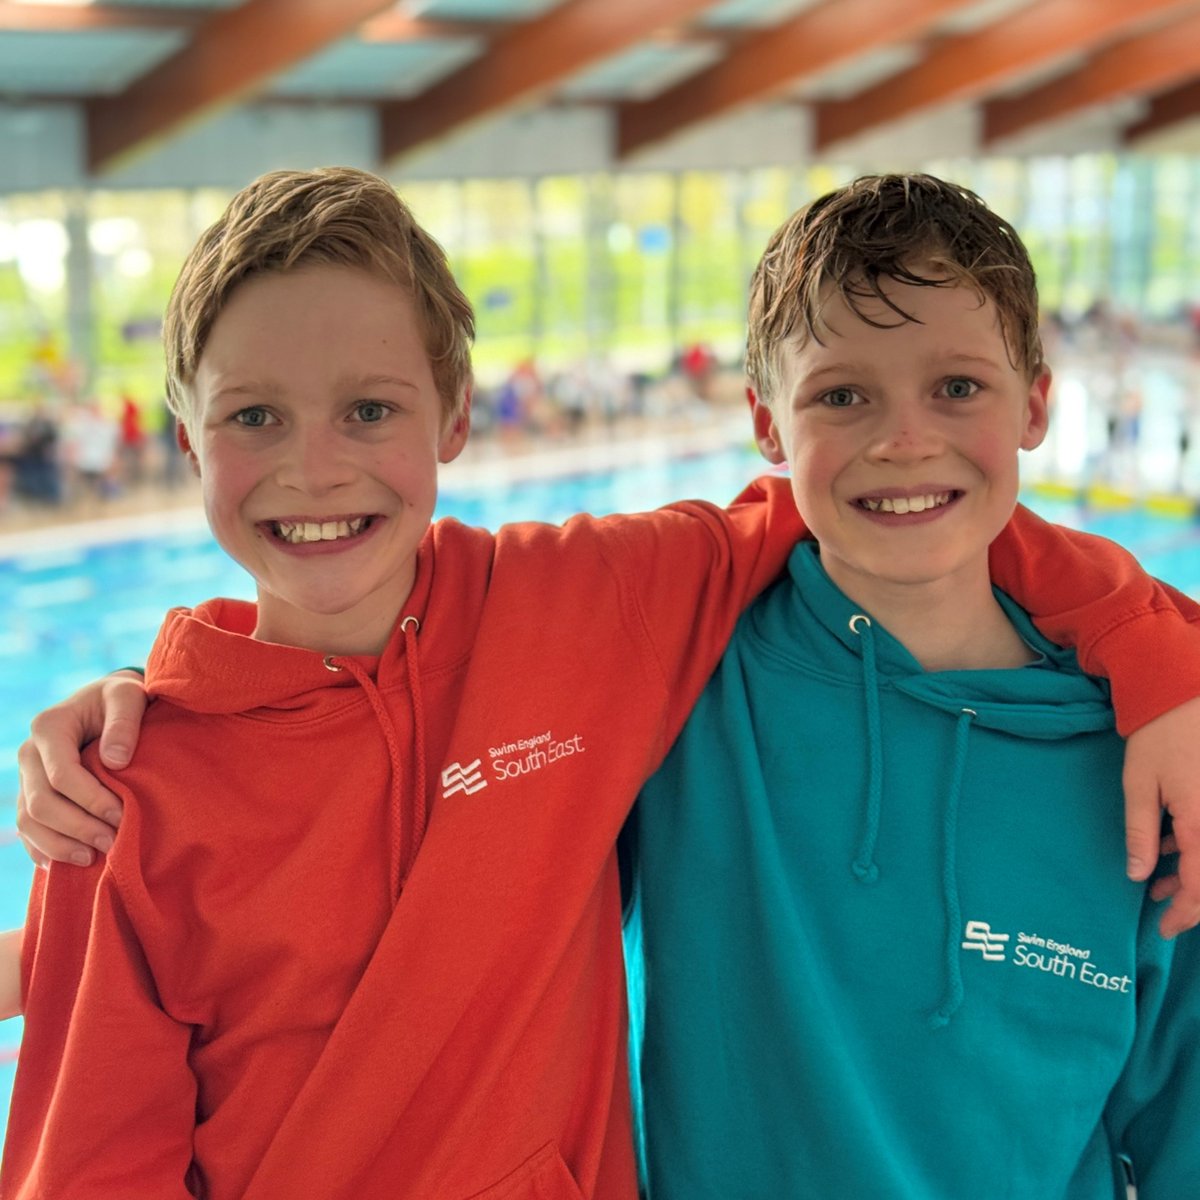 Congratulations to Alex and Lawrence in Year 6 who have both qualified to compete at the Swim England South East Regional Swimming Championships in Winchester this weekend. This is a remarkable accomplishment, and we wish them the best of luck!🏊‍♂️ #swimming #sport #perseverance